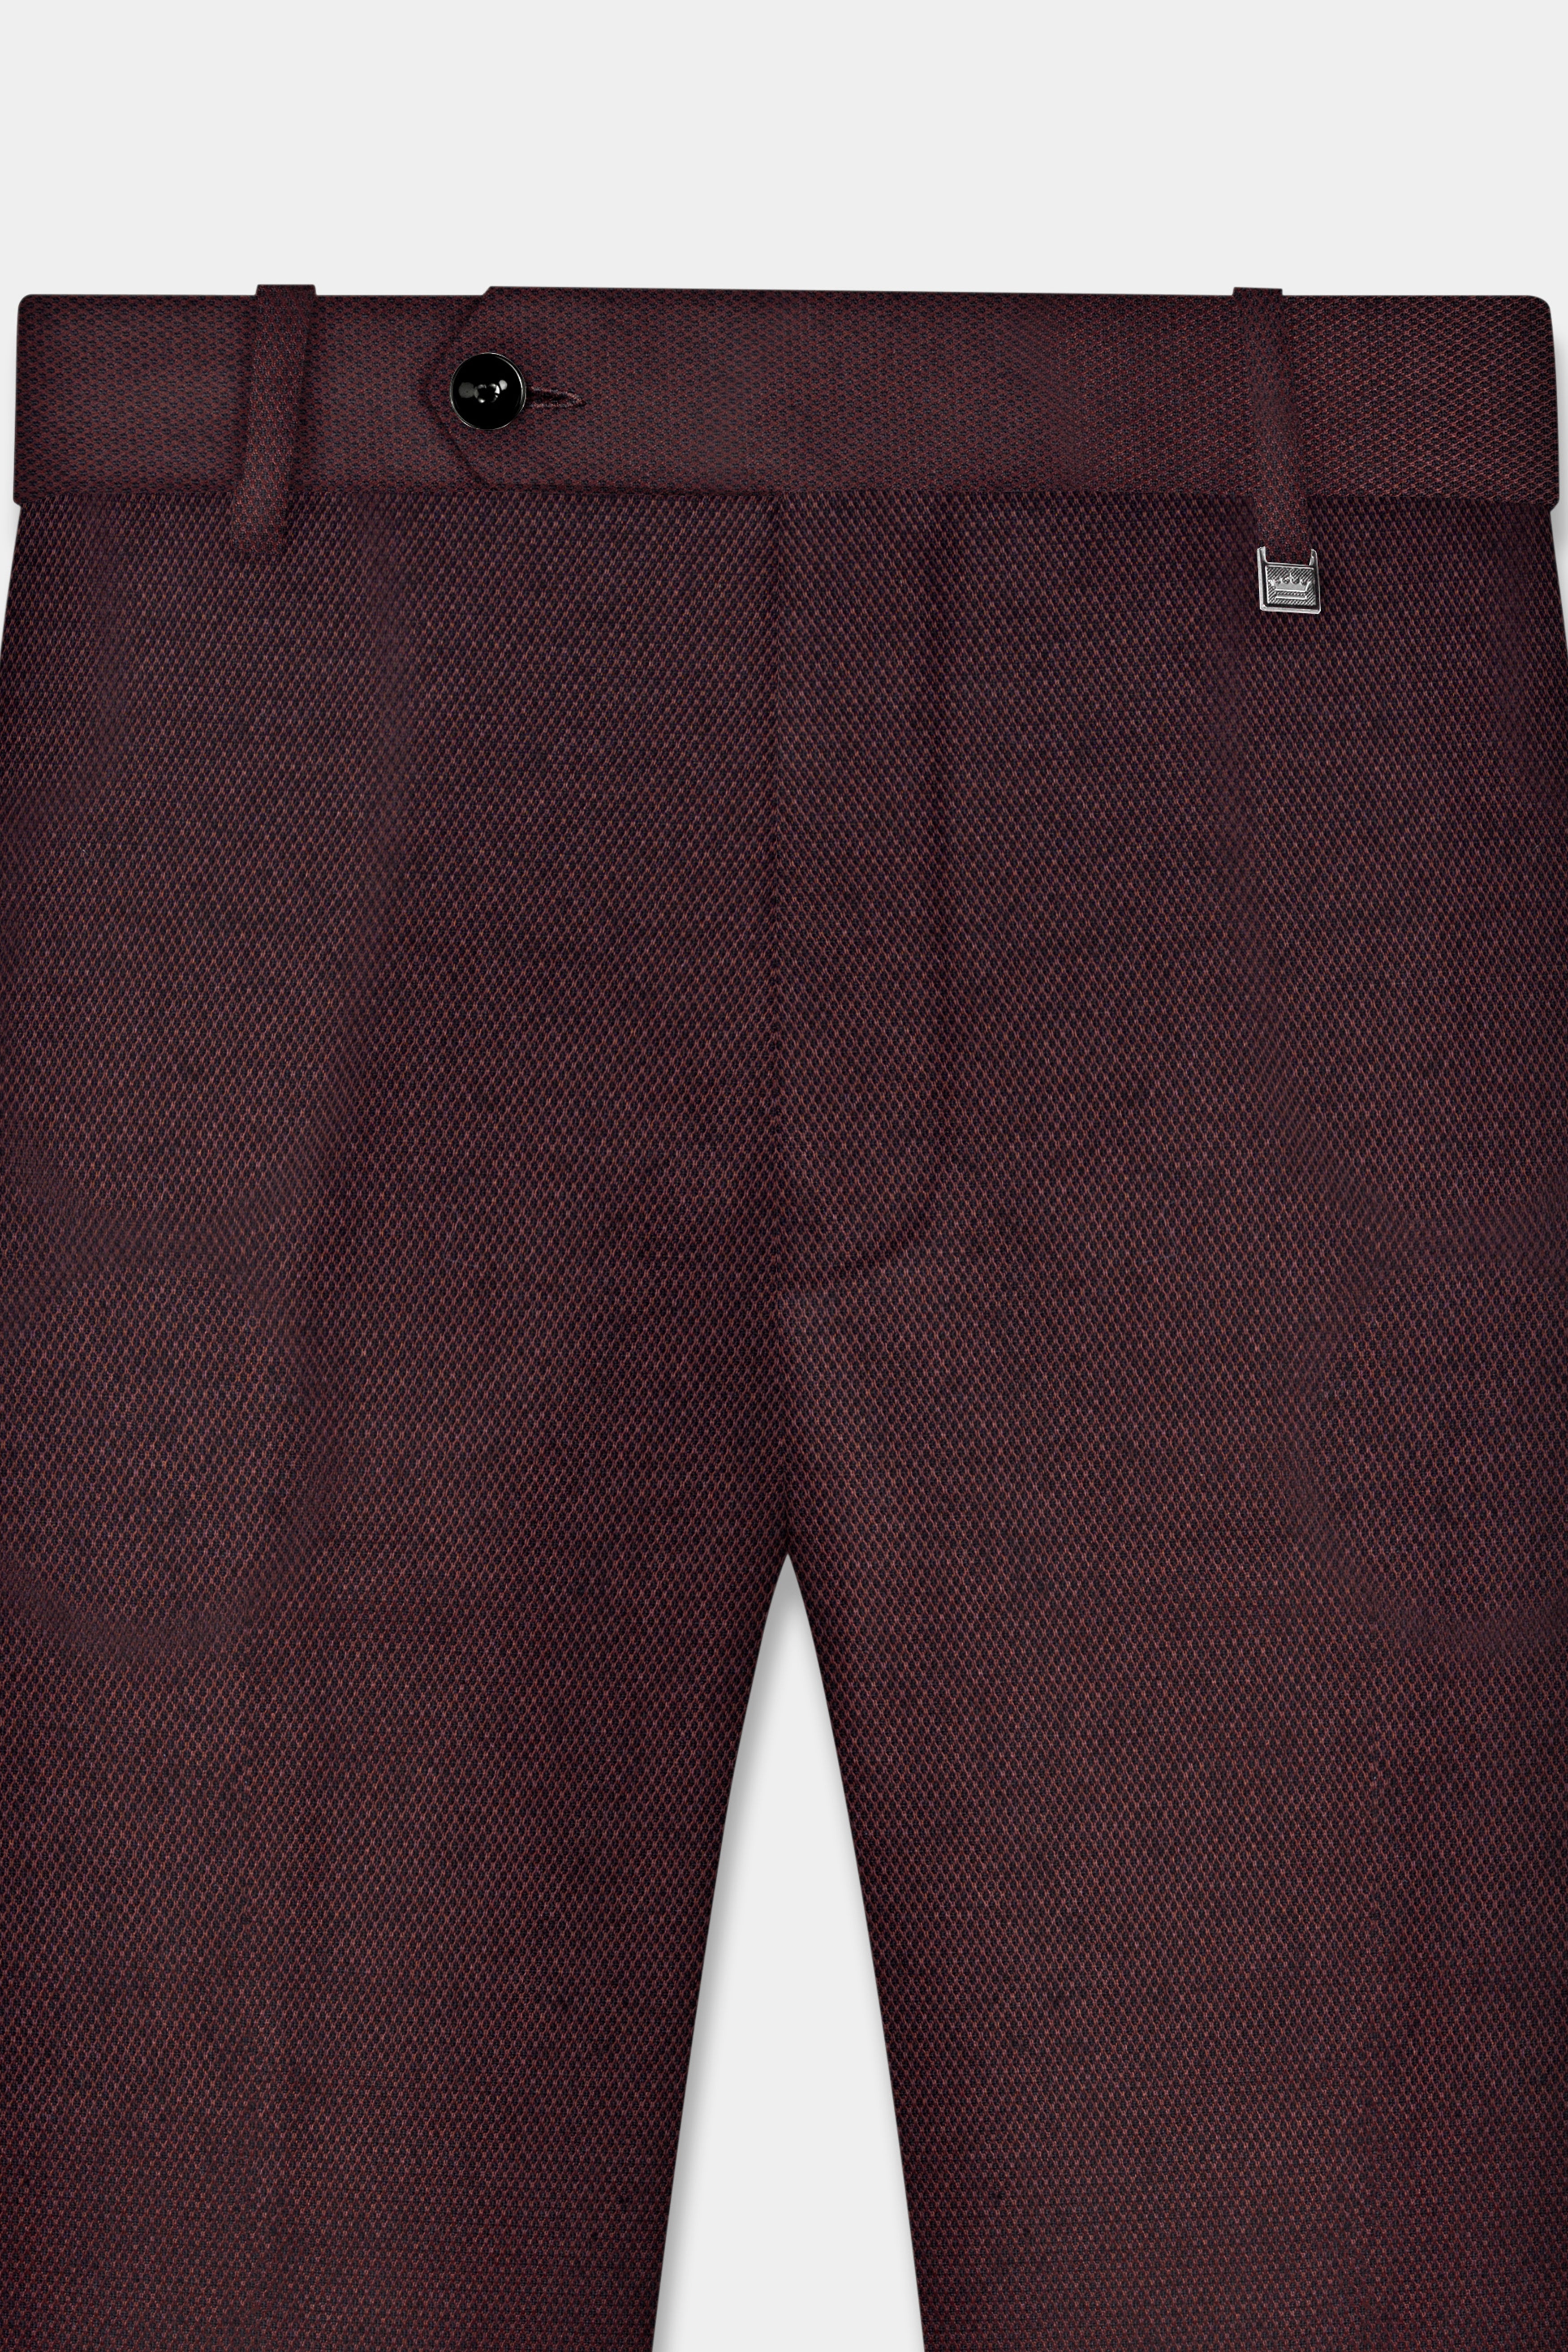 Eclipse Maroon Textured Wool Rich Bandhgala Suit